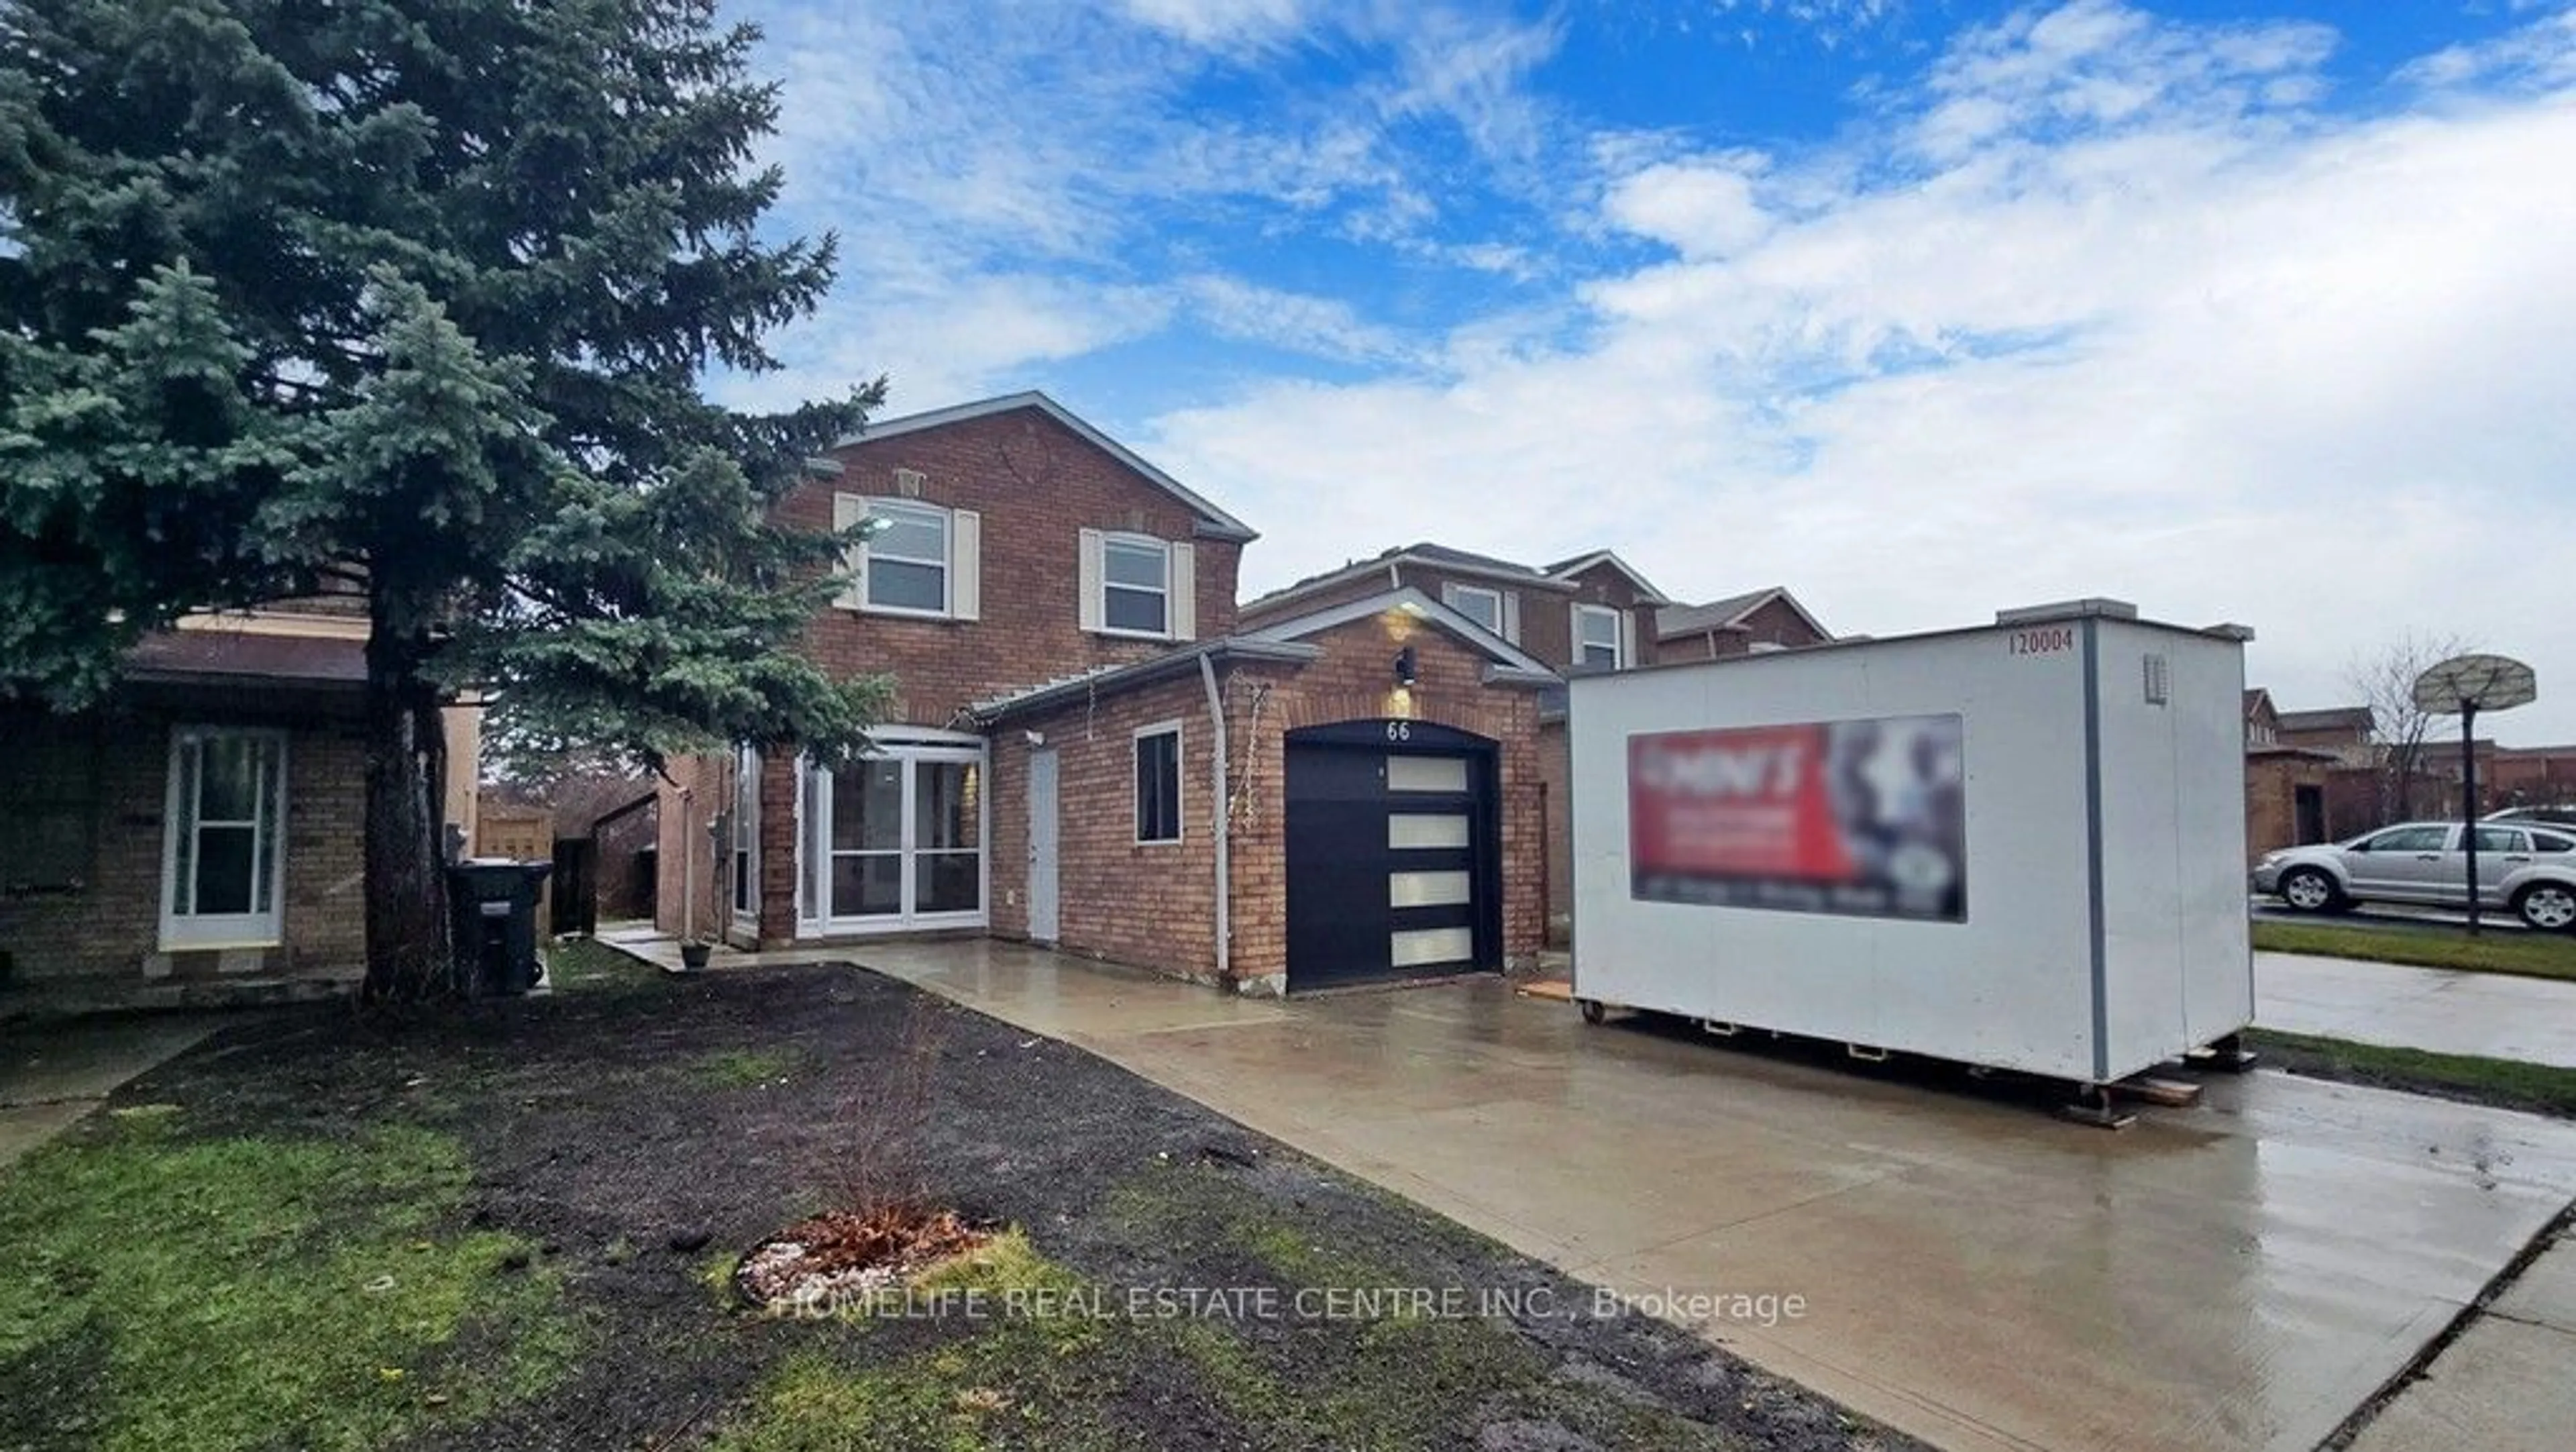 Frontside or backside of a home for 66 Calmist Cres, Brampton Ontario L6Y 4L5